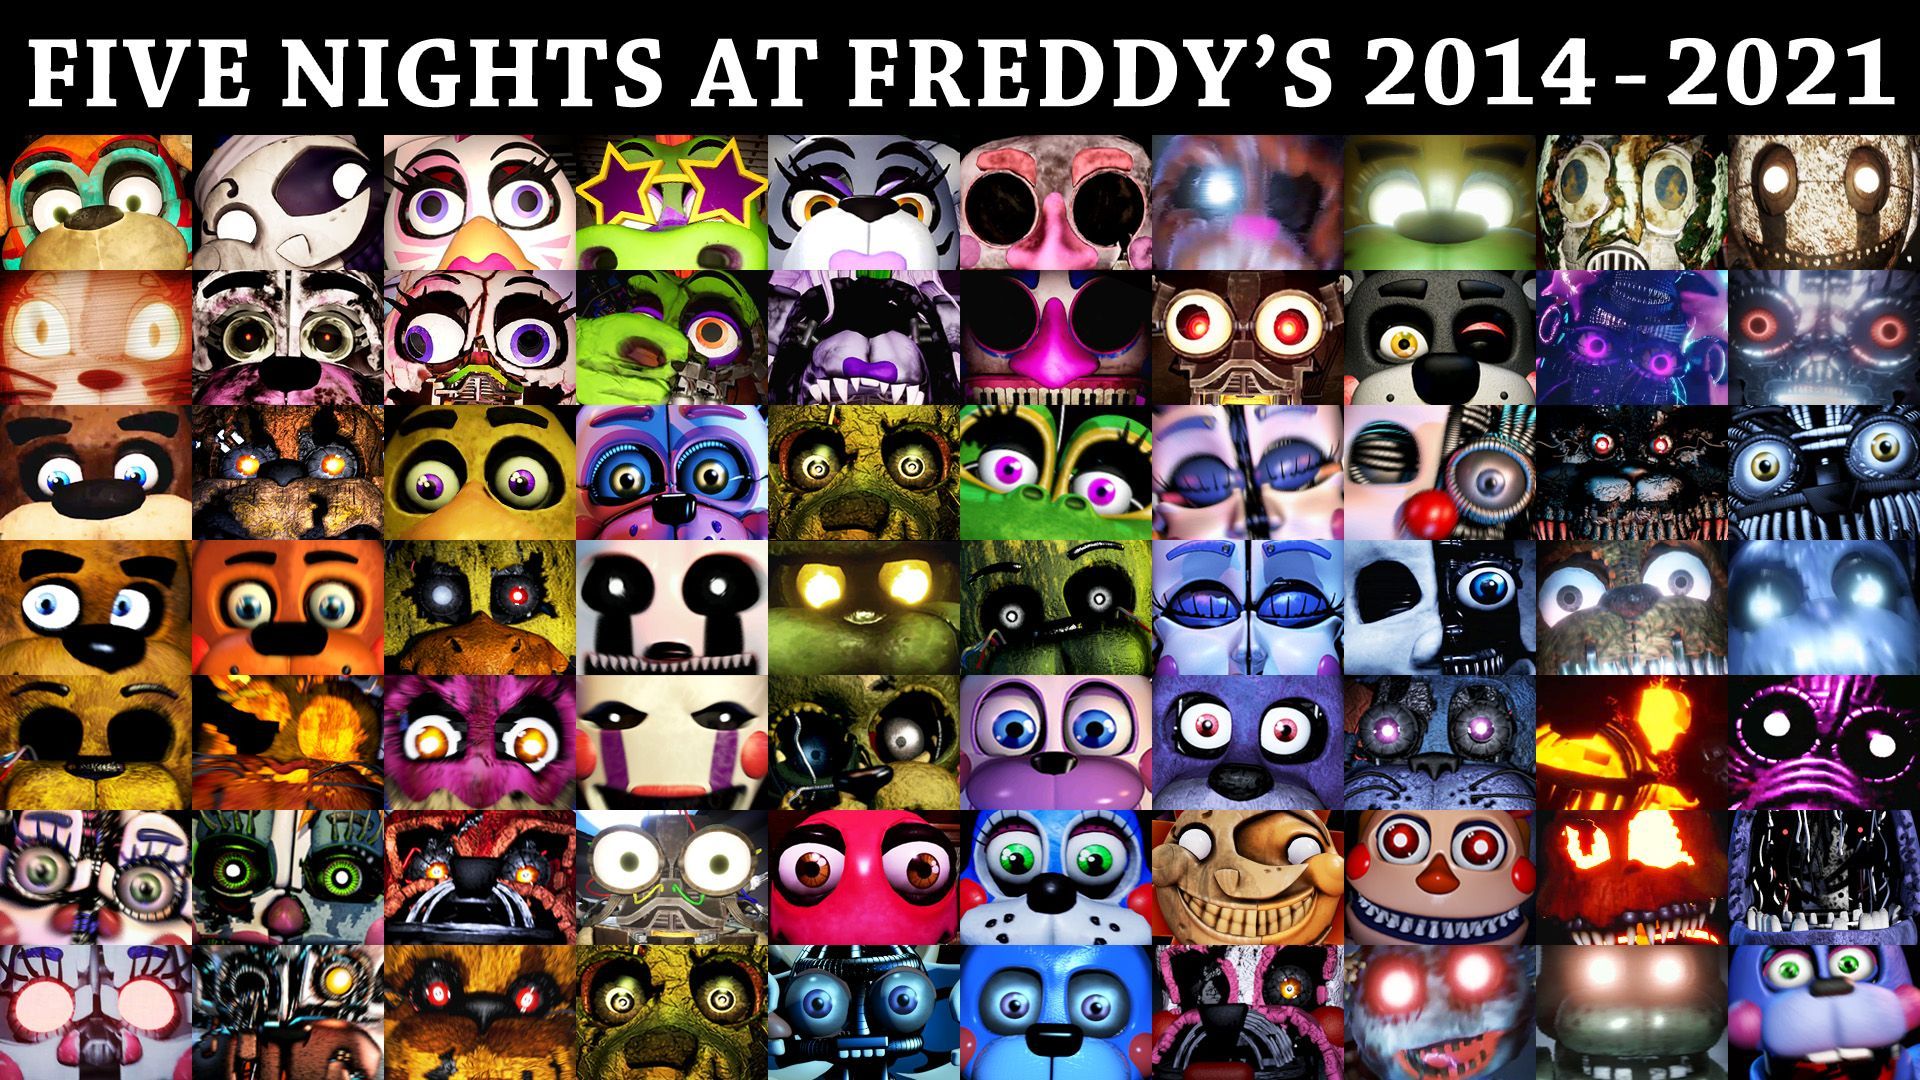 Five Nights at Freddy's VR ALL ANIMATRONICS FNAF 1 2 3 4 5 6 UCN Help  Wanted 